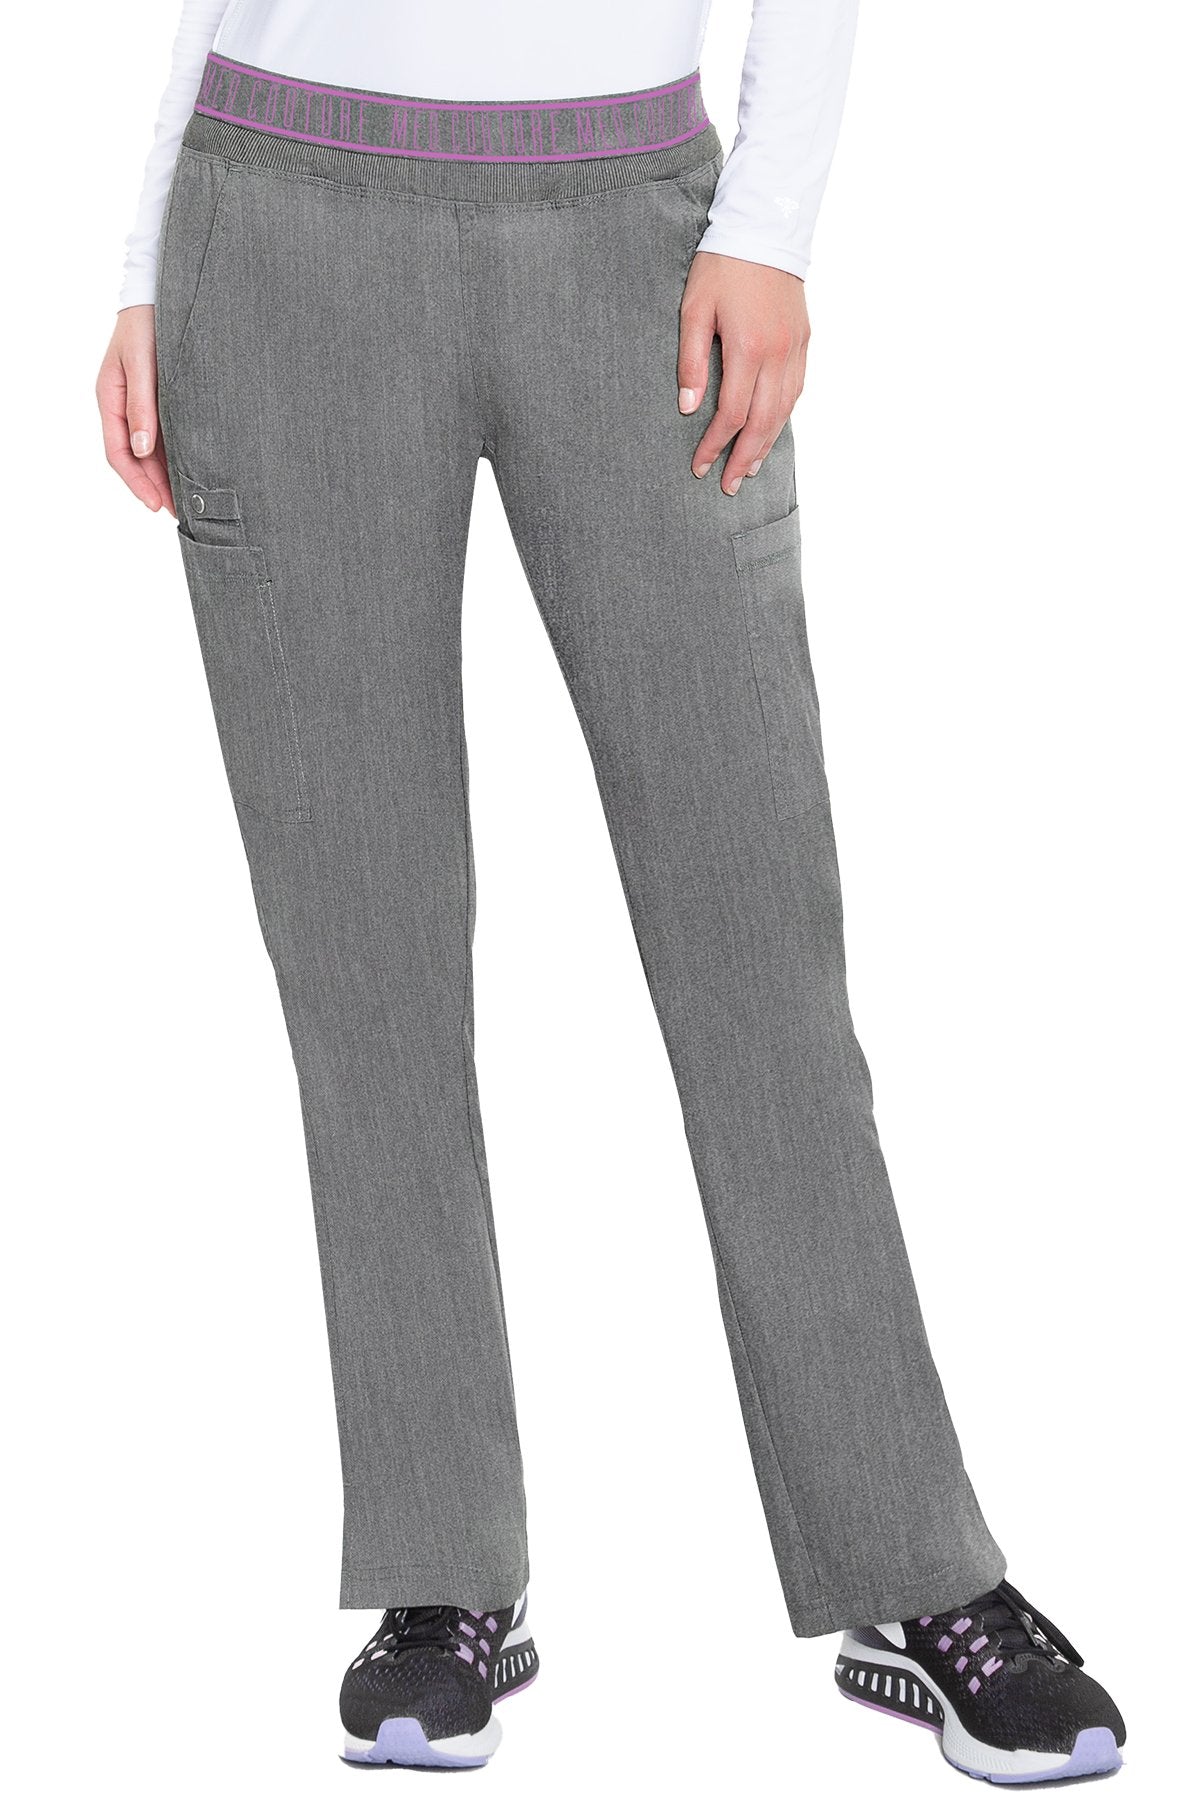 Yoga 2 Cargo Pocket Pant by Med Couture (Petite) XS-5XL/ Slate